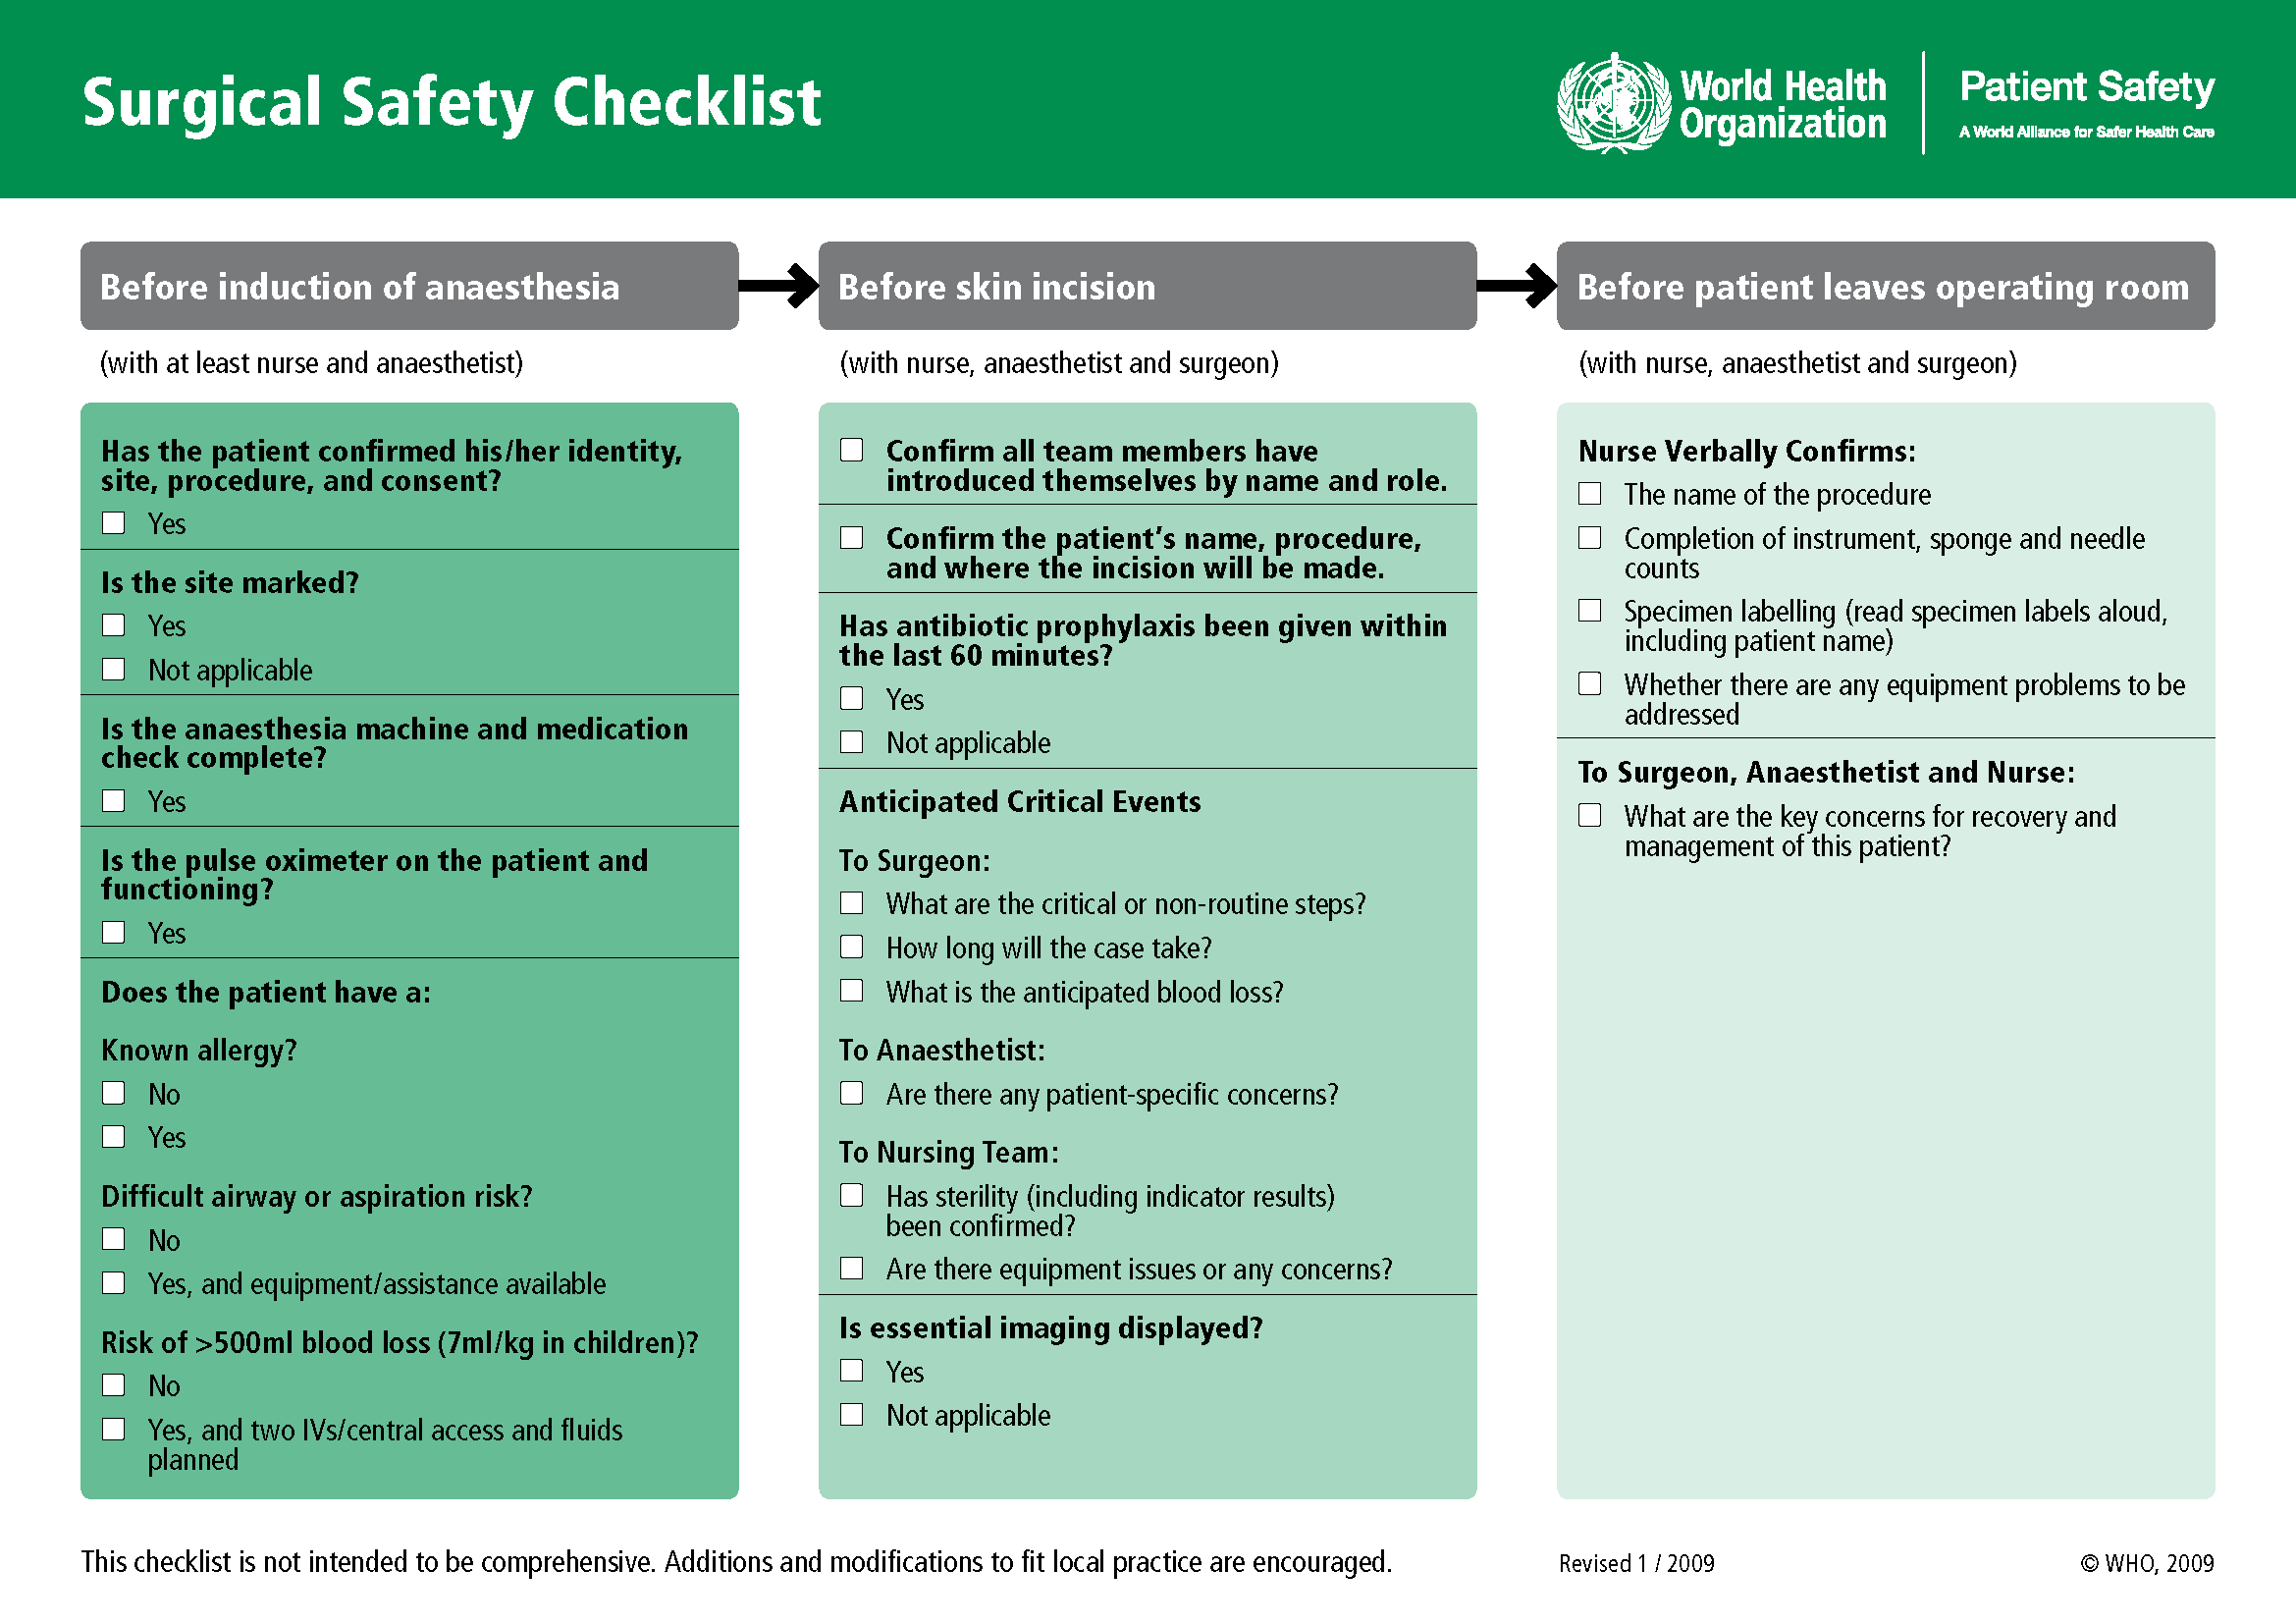 Image showing a surgical safety checklist